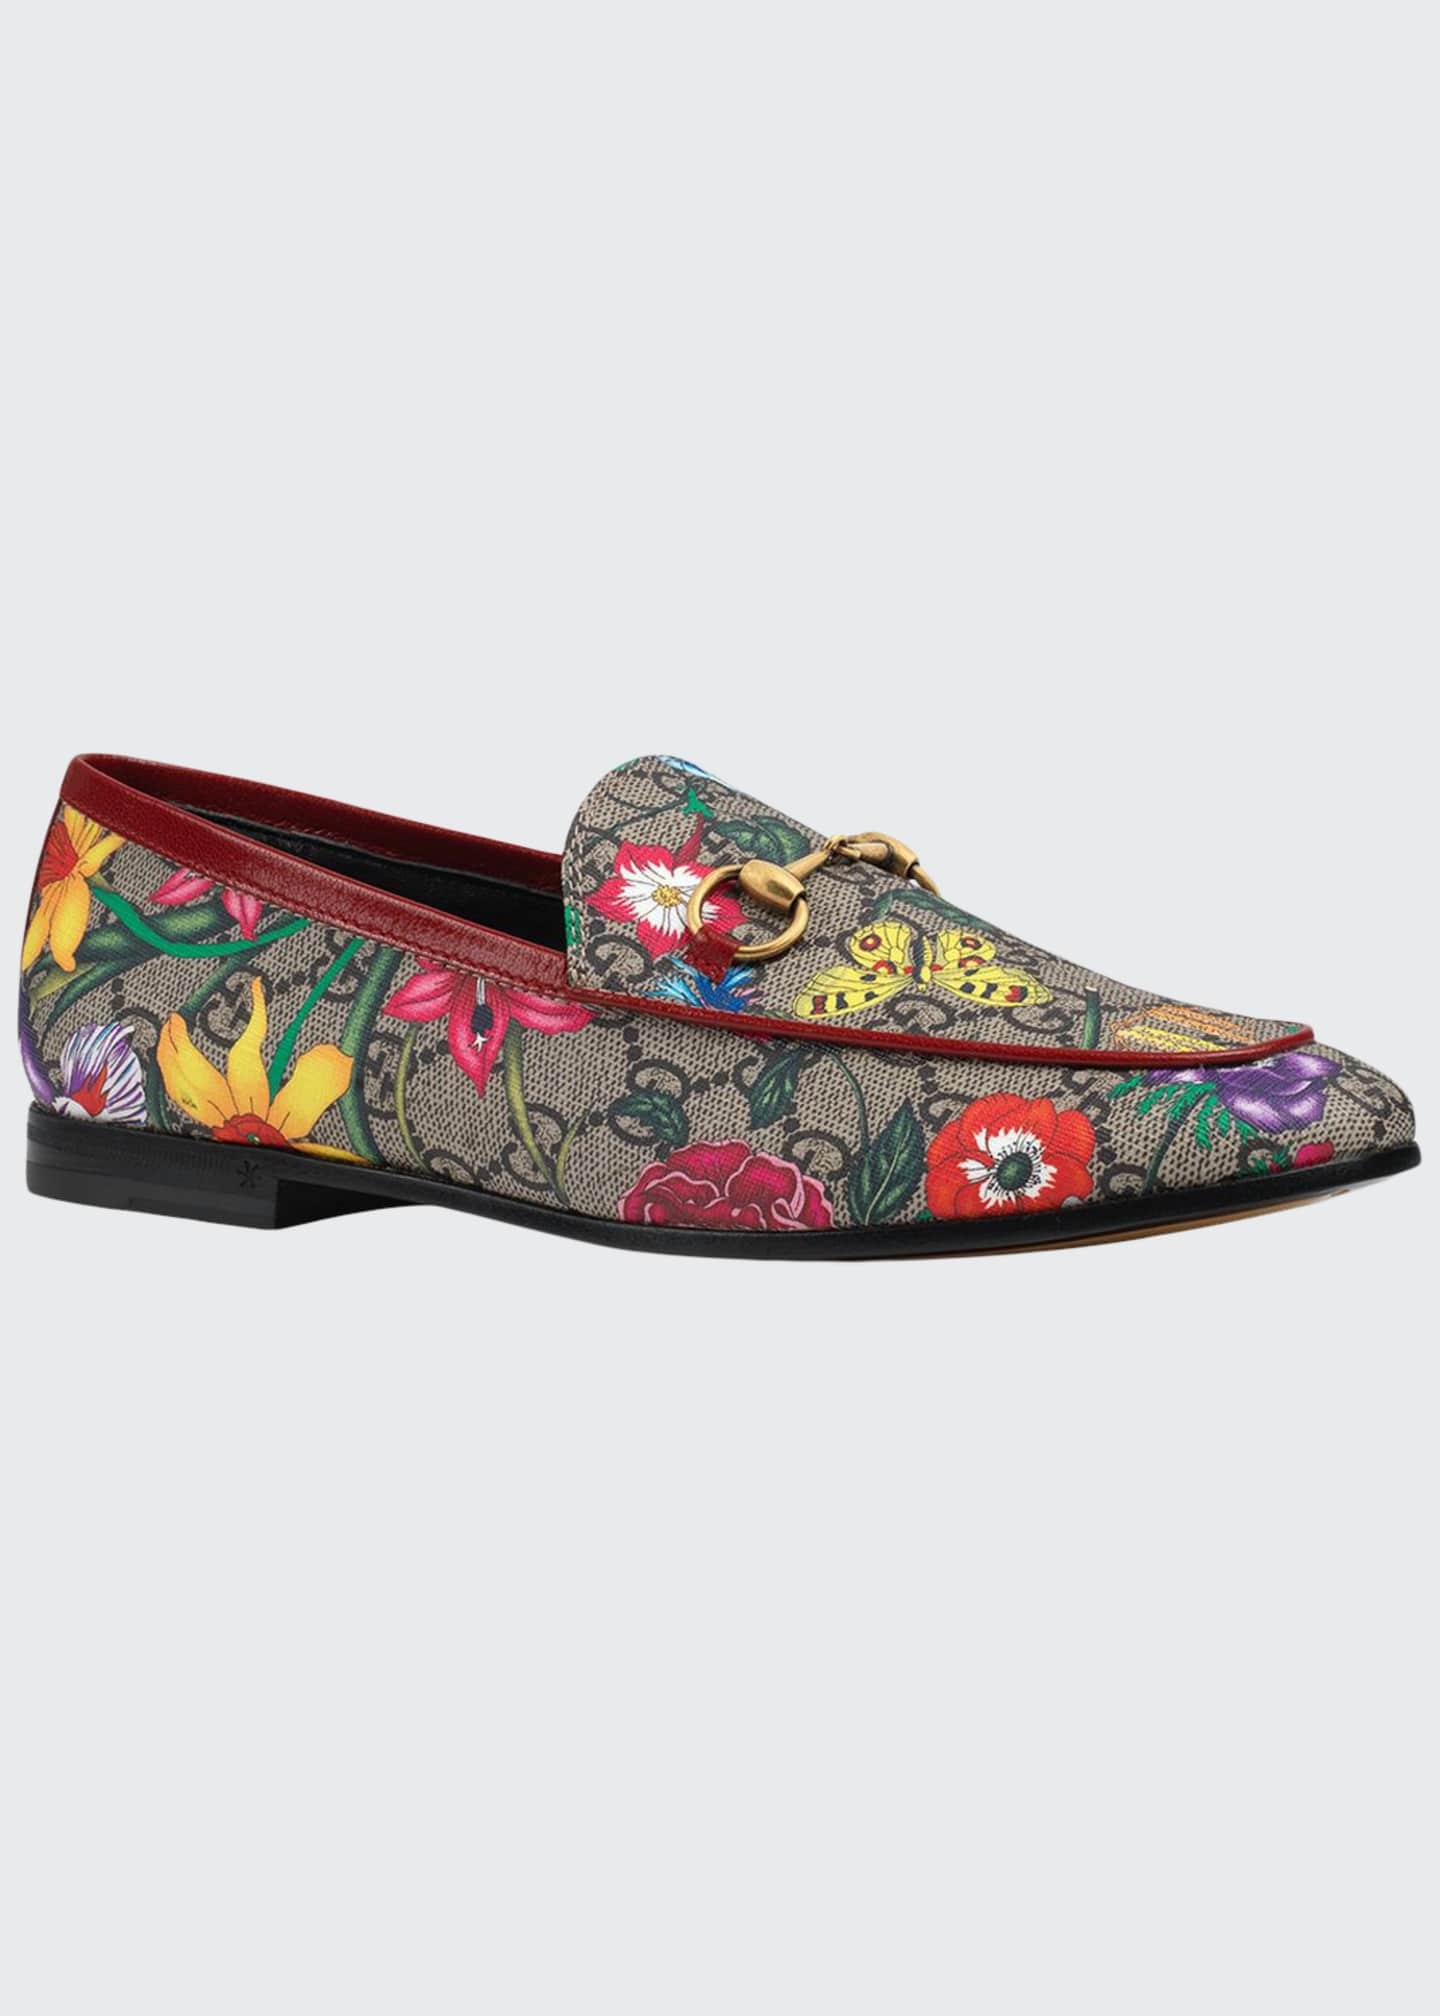 Gucci Jordaan Flat Floral Canvas Loafers - Save 8% - Lyst